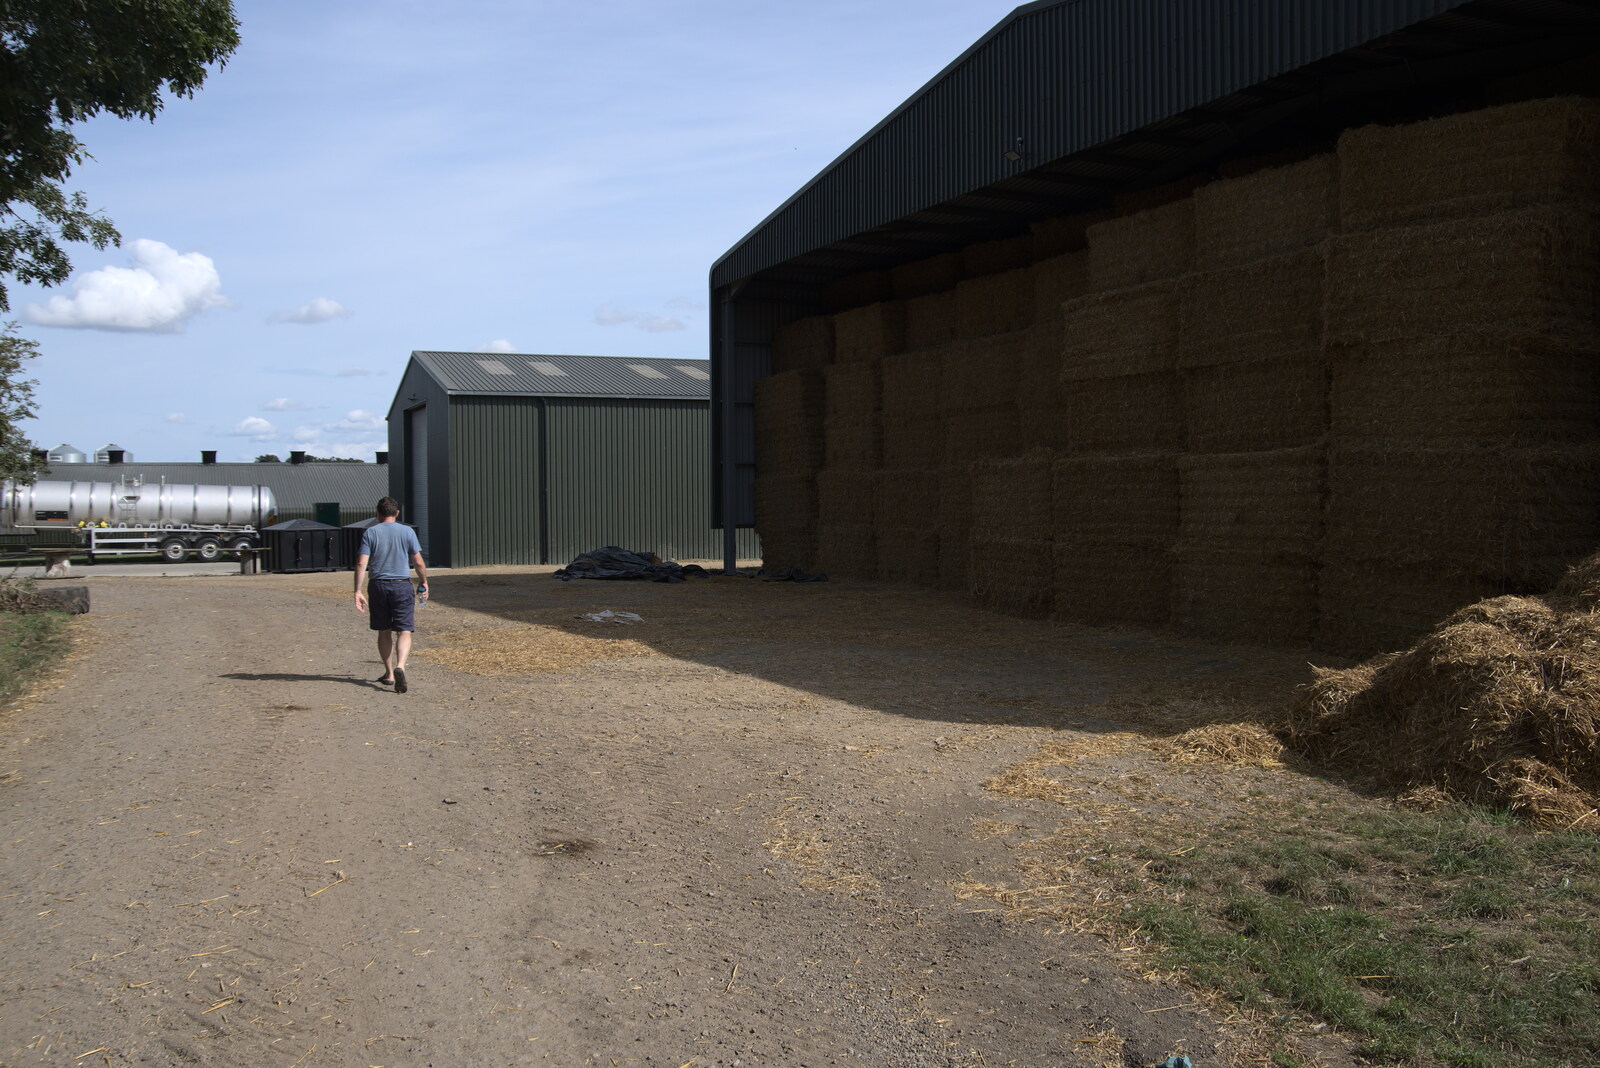 Clive roams around near the new chicken farm from A Summer Party and an Airfield Walk with Clive, Brome, Suffolk - 11th September 2021